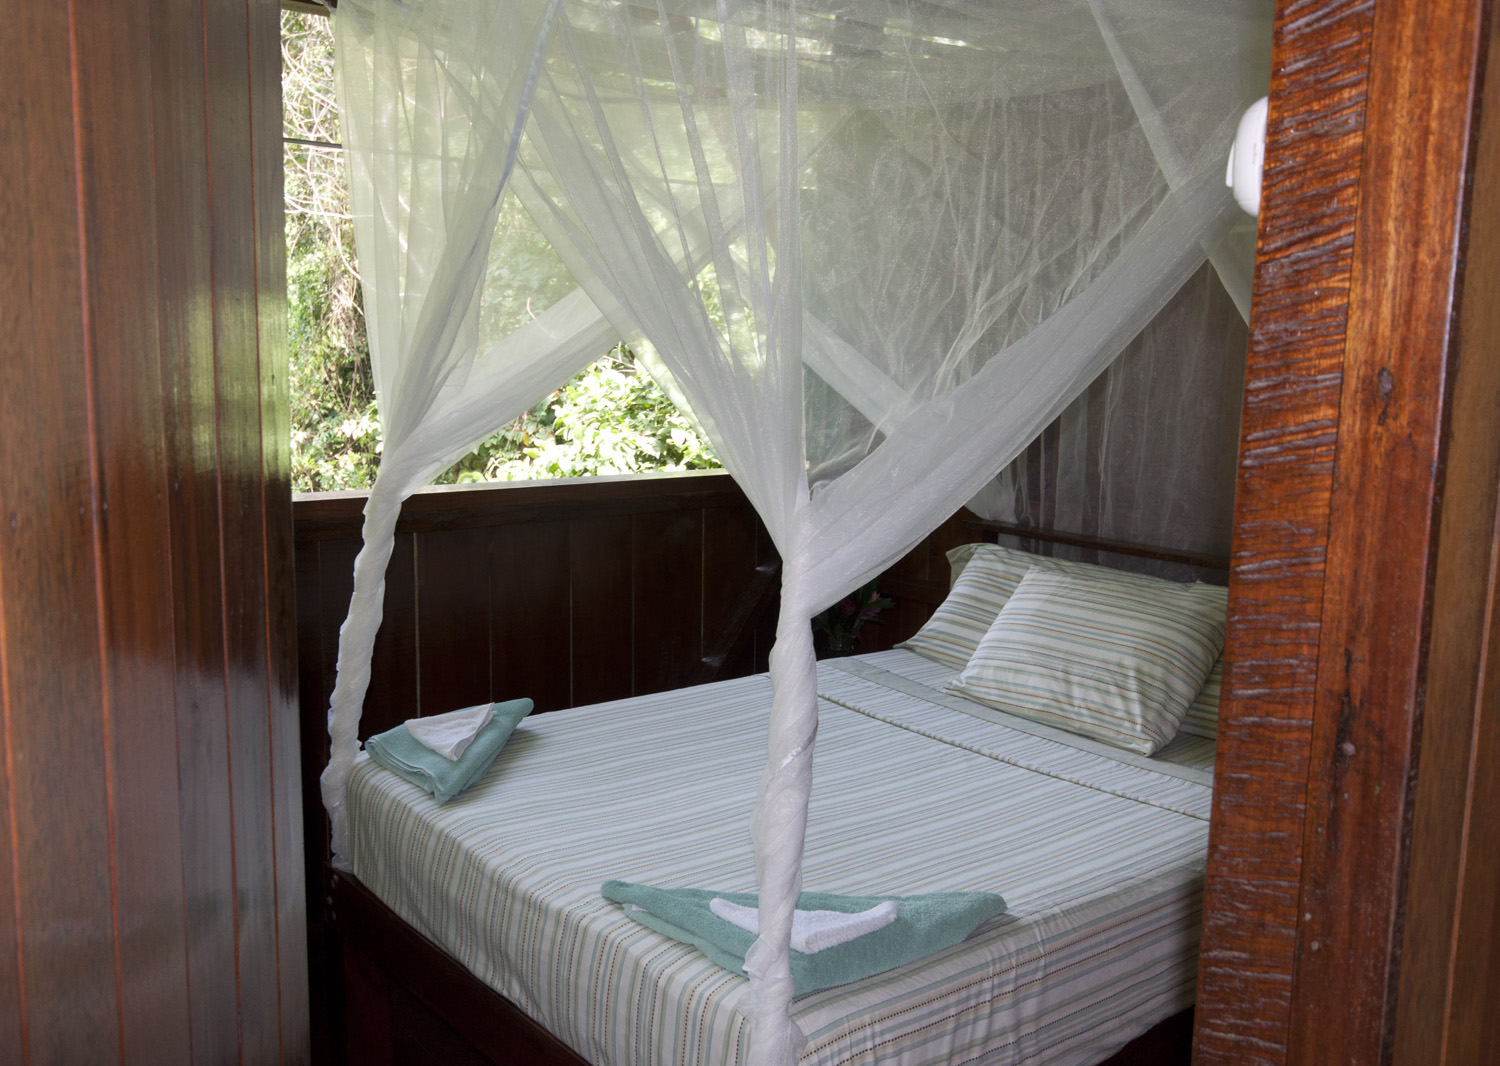 Our lodge uses fine fabrics and romantic netting for the beds